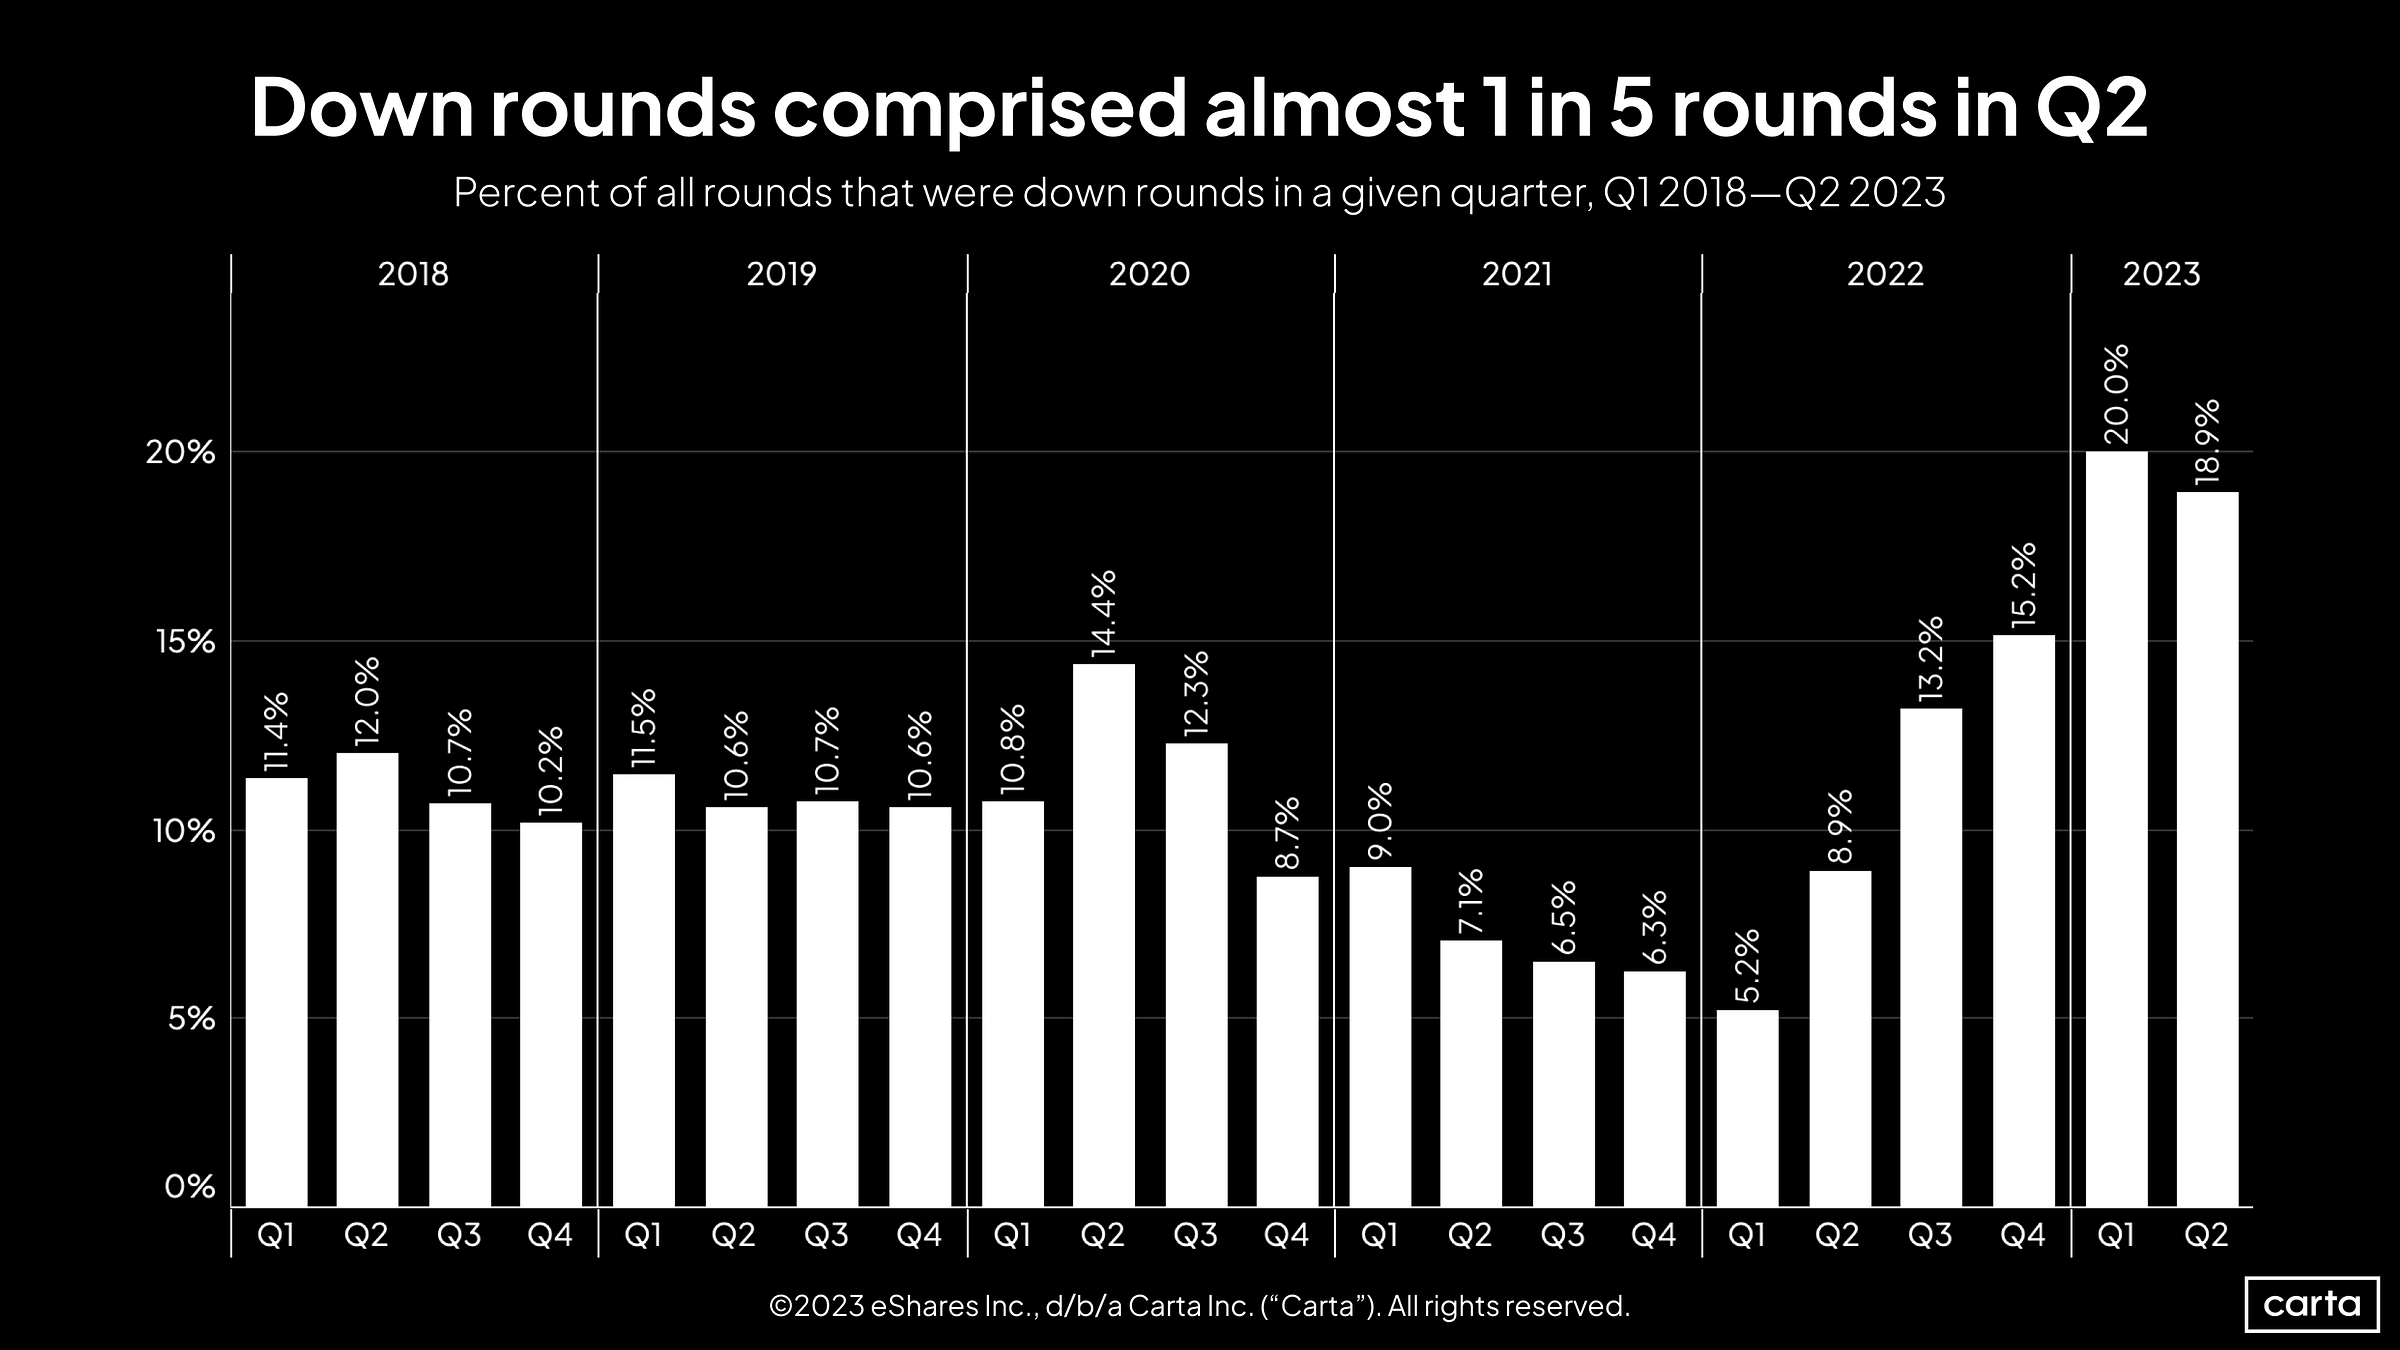 Percent of all rounds that were down rounds in a given quarter, Q1 2018- Q2 2023